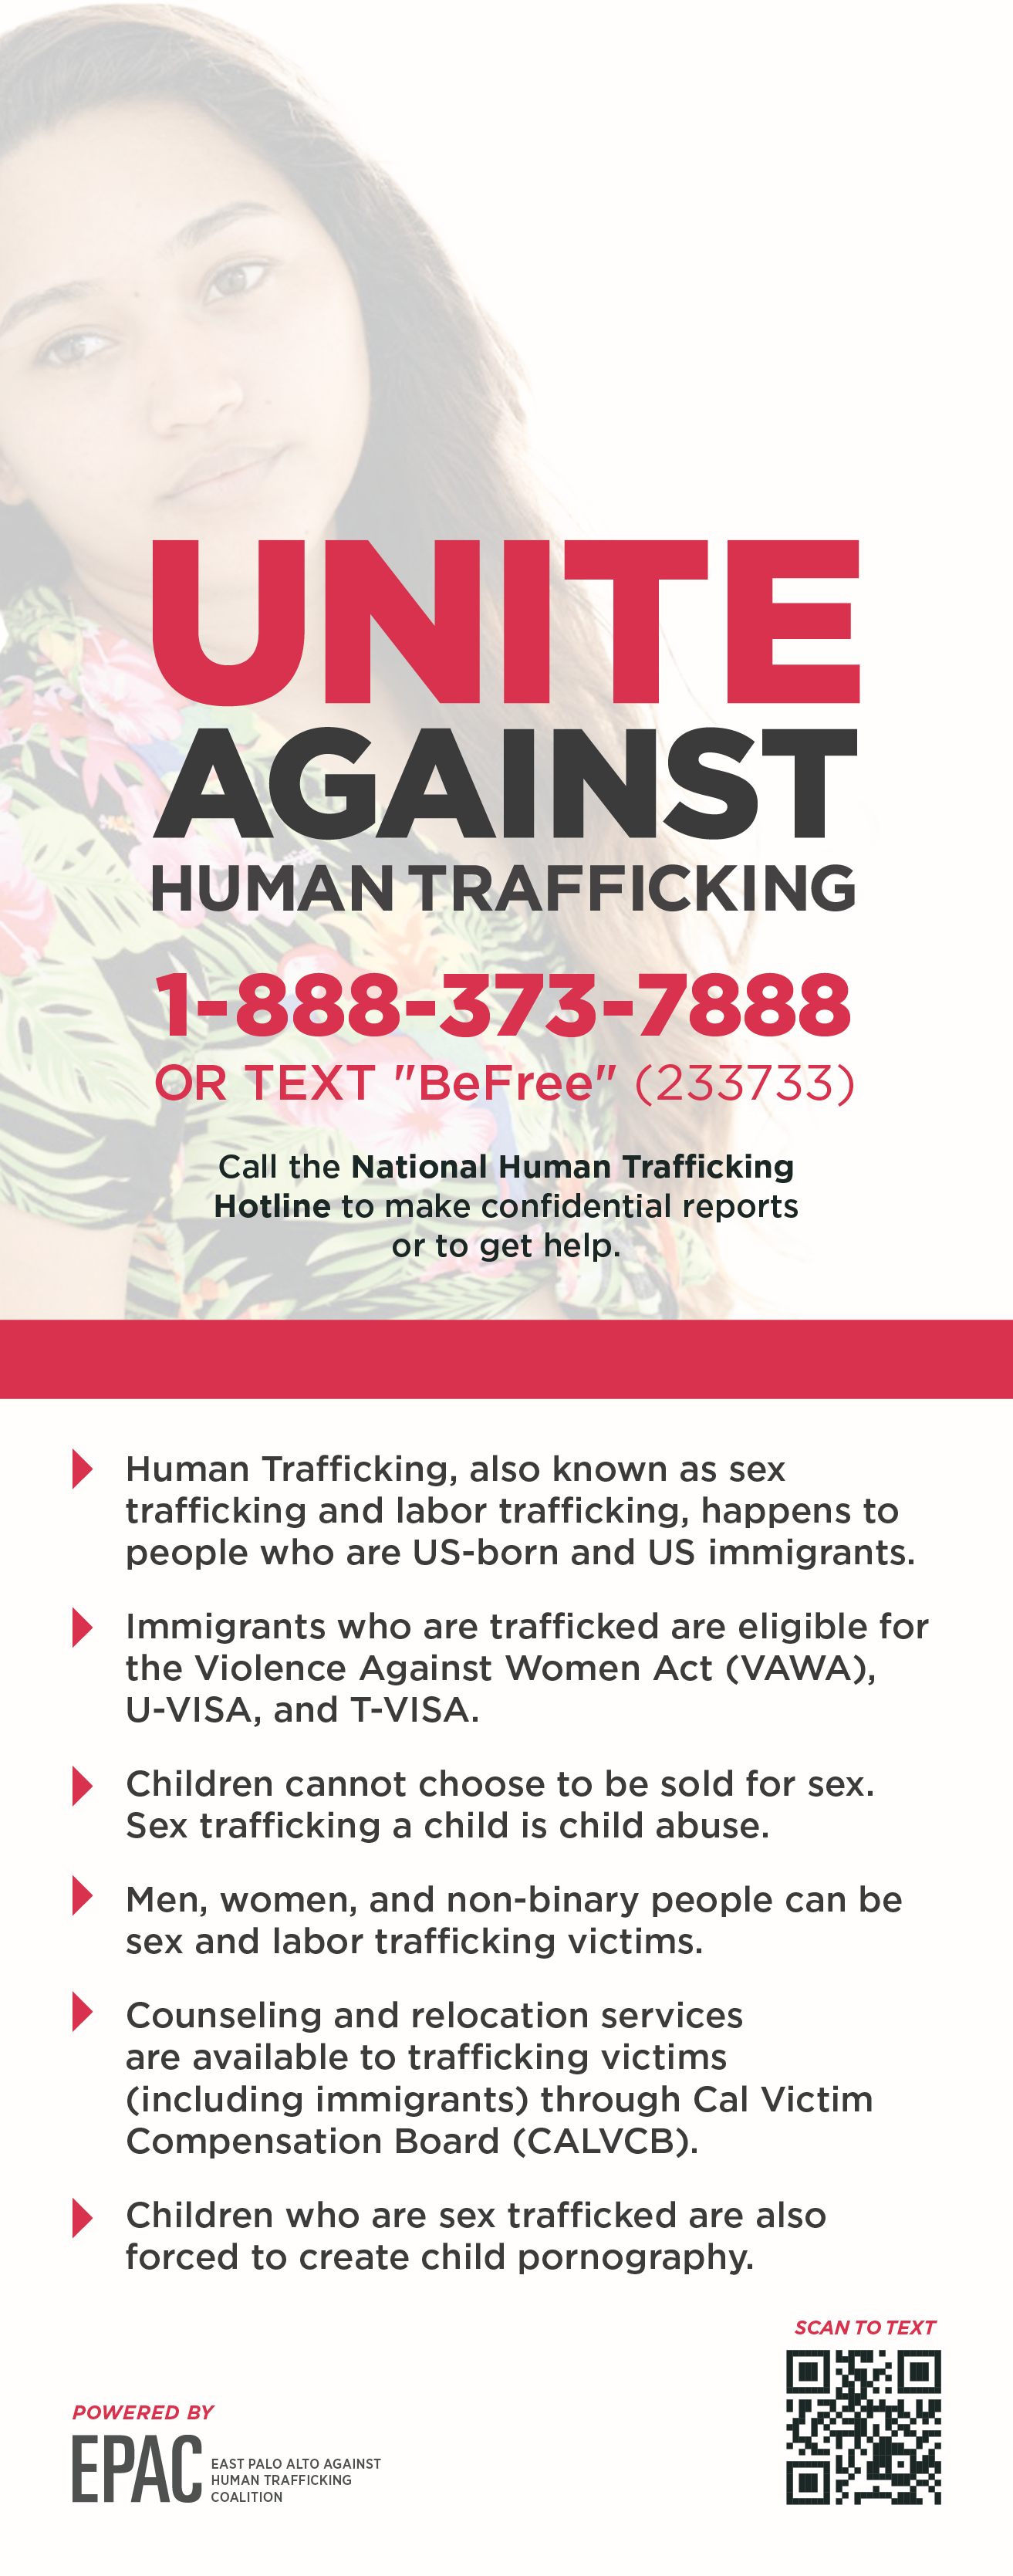 Human Trafficking Resources City Of East Palo Alto 8996